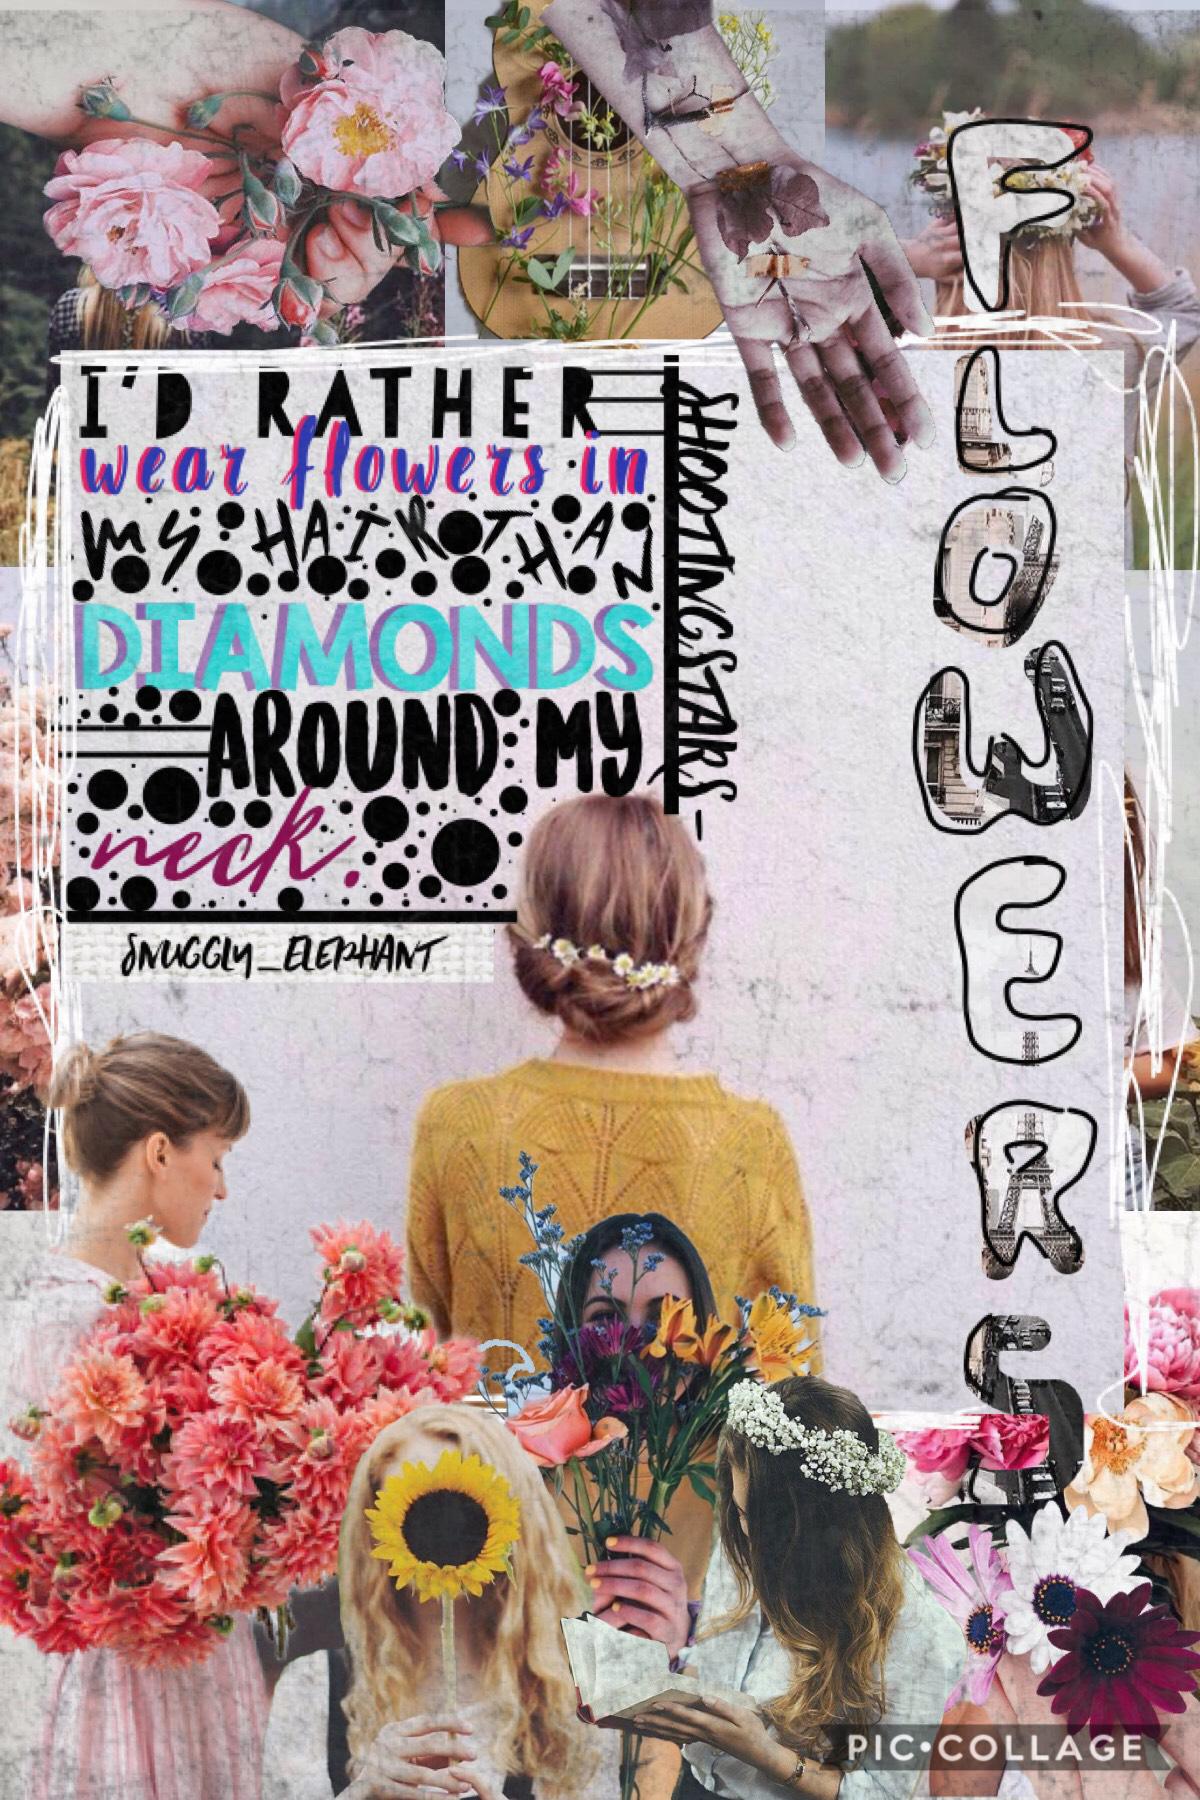 💐{41/42}Collab with the fantastically super (Tap)💐
Snuggly_Elephant!!! Go follow her!
This is my last collage/collab! Next “collab” is a mega collab!

Q// Flowers or Trees?
A// Flowers